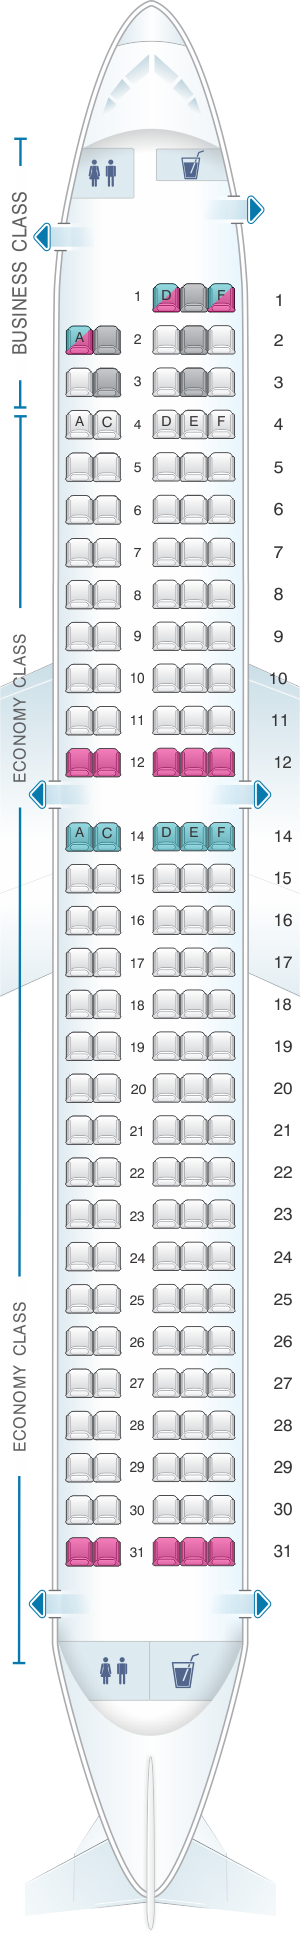 Airbus A220 Jet Seating Chart Image To U